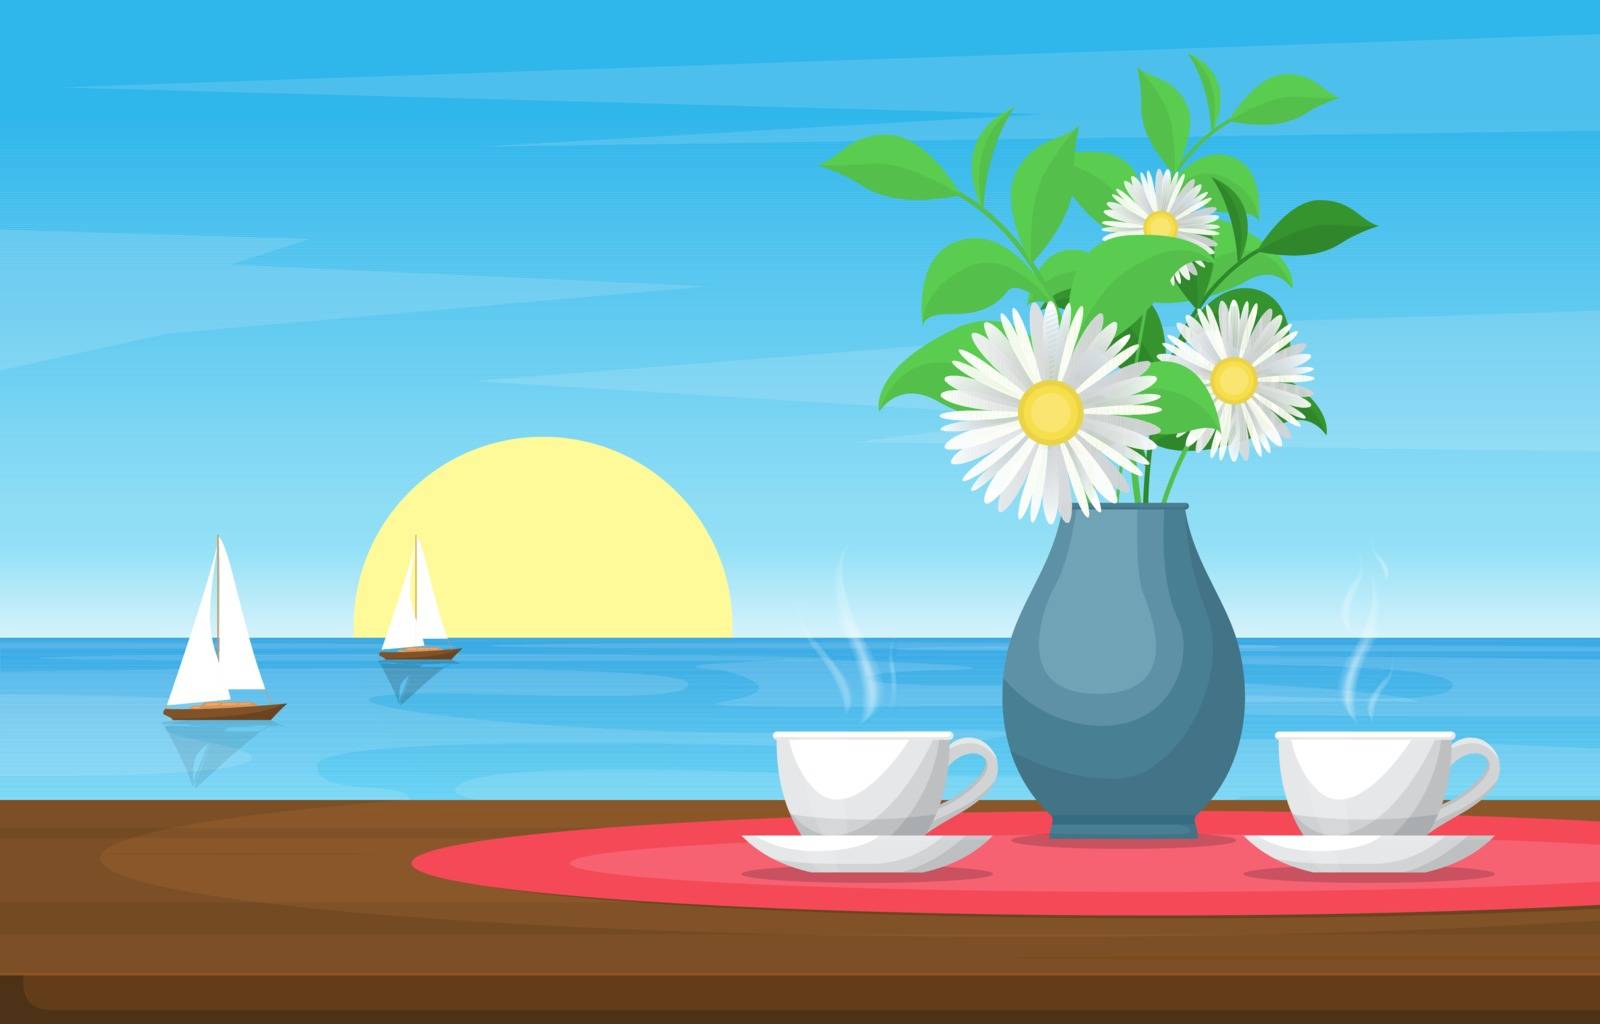 Cups of Tea on Table in Sea View Sunset Sailing Boat Illustration by jongcreative